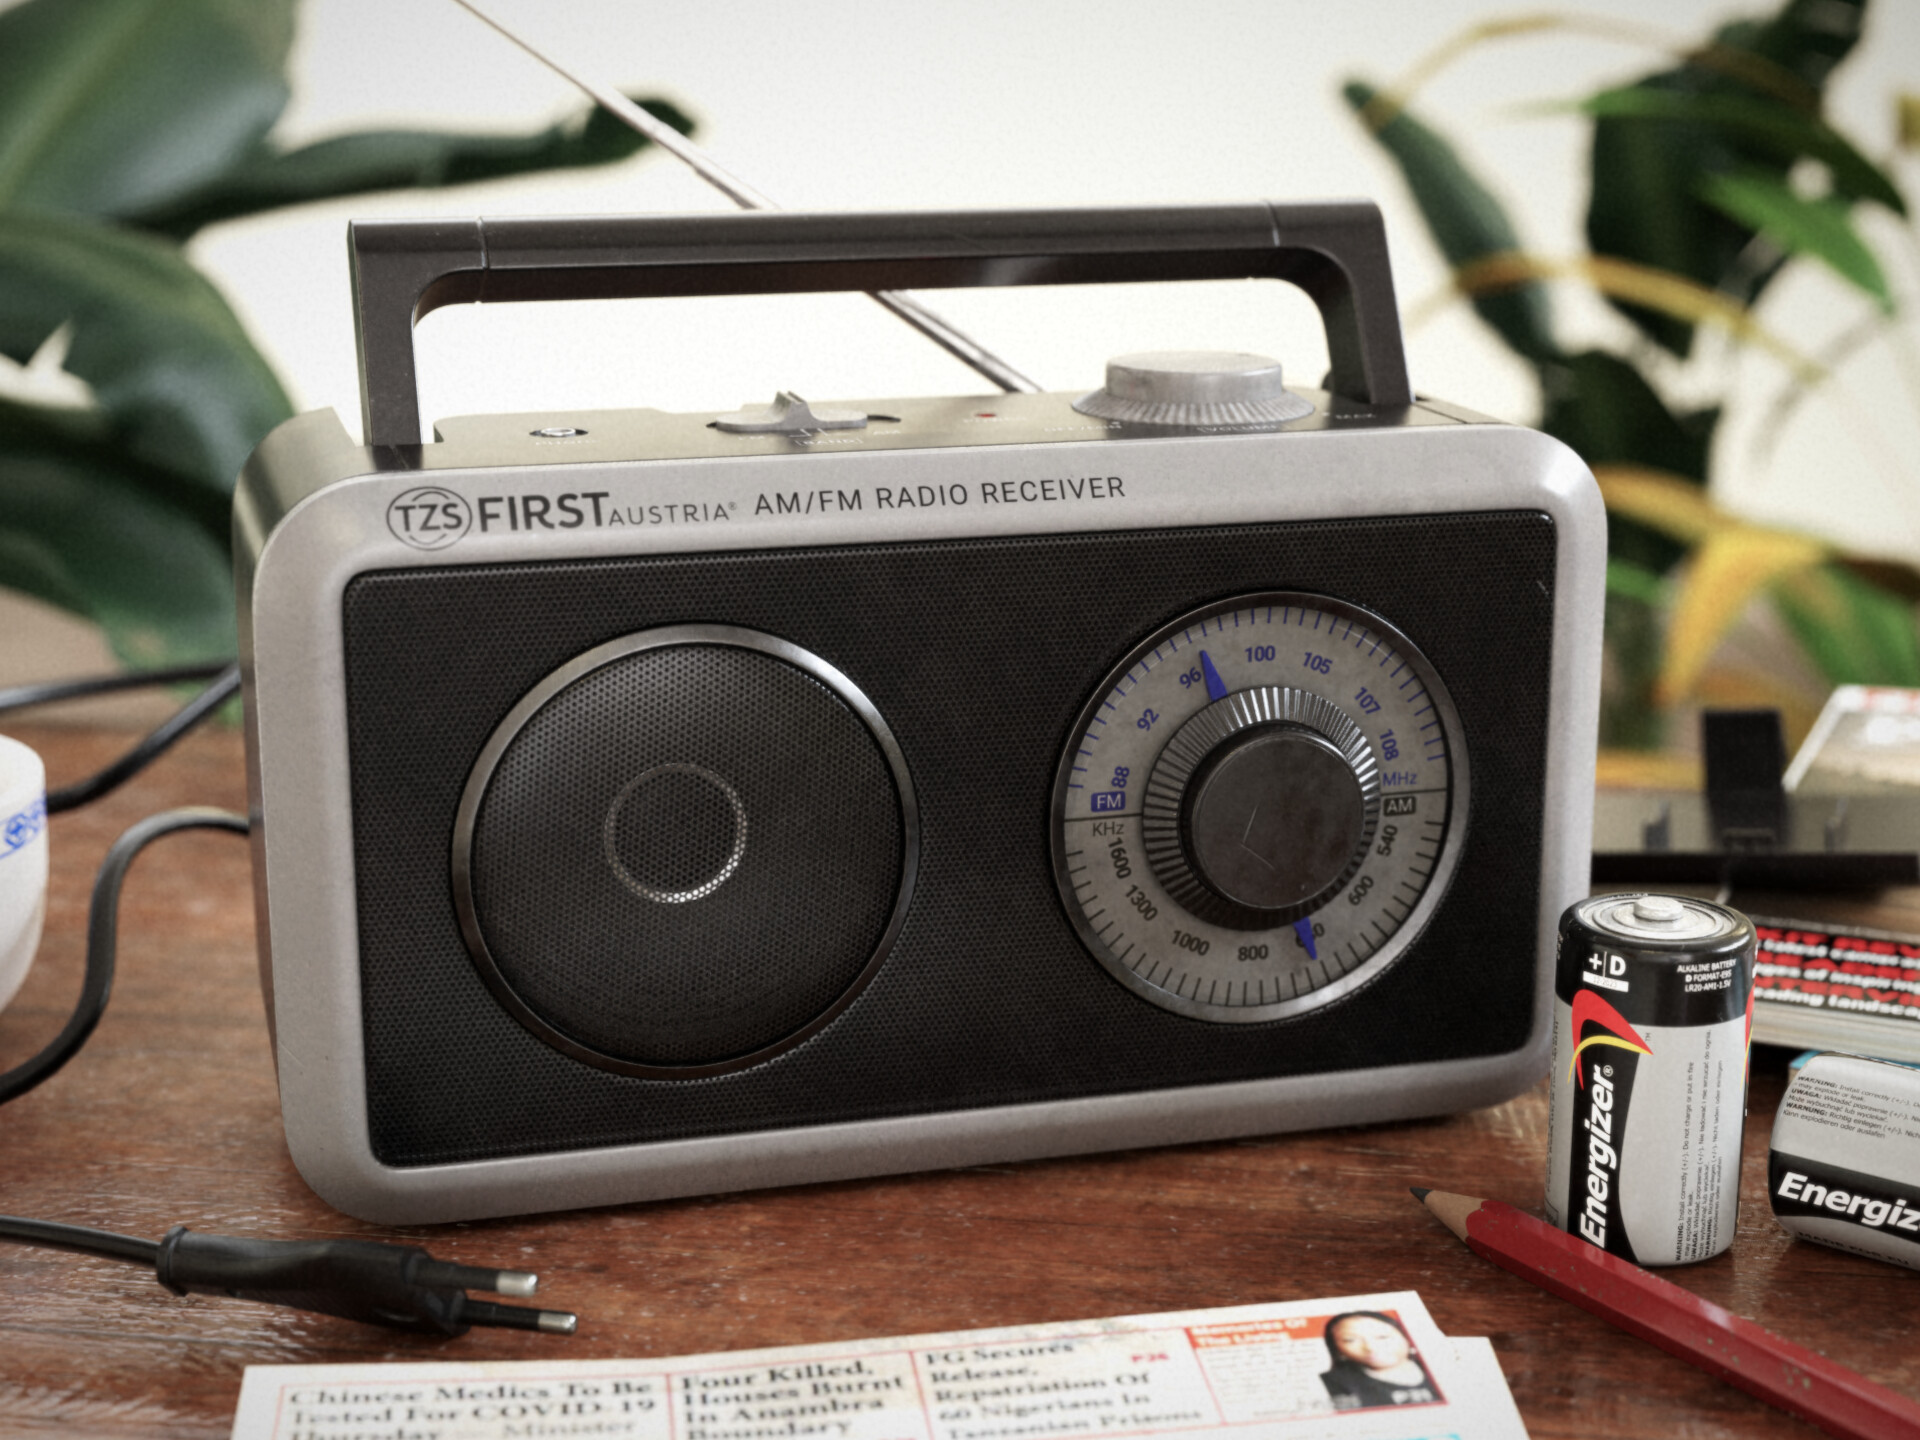 TZS First Austria AM/FM Radio Receiver - Finished Projects - Blender  Artists Community